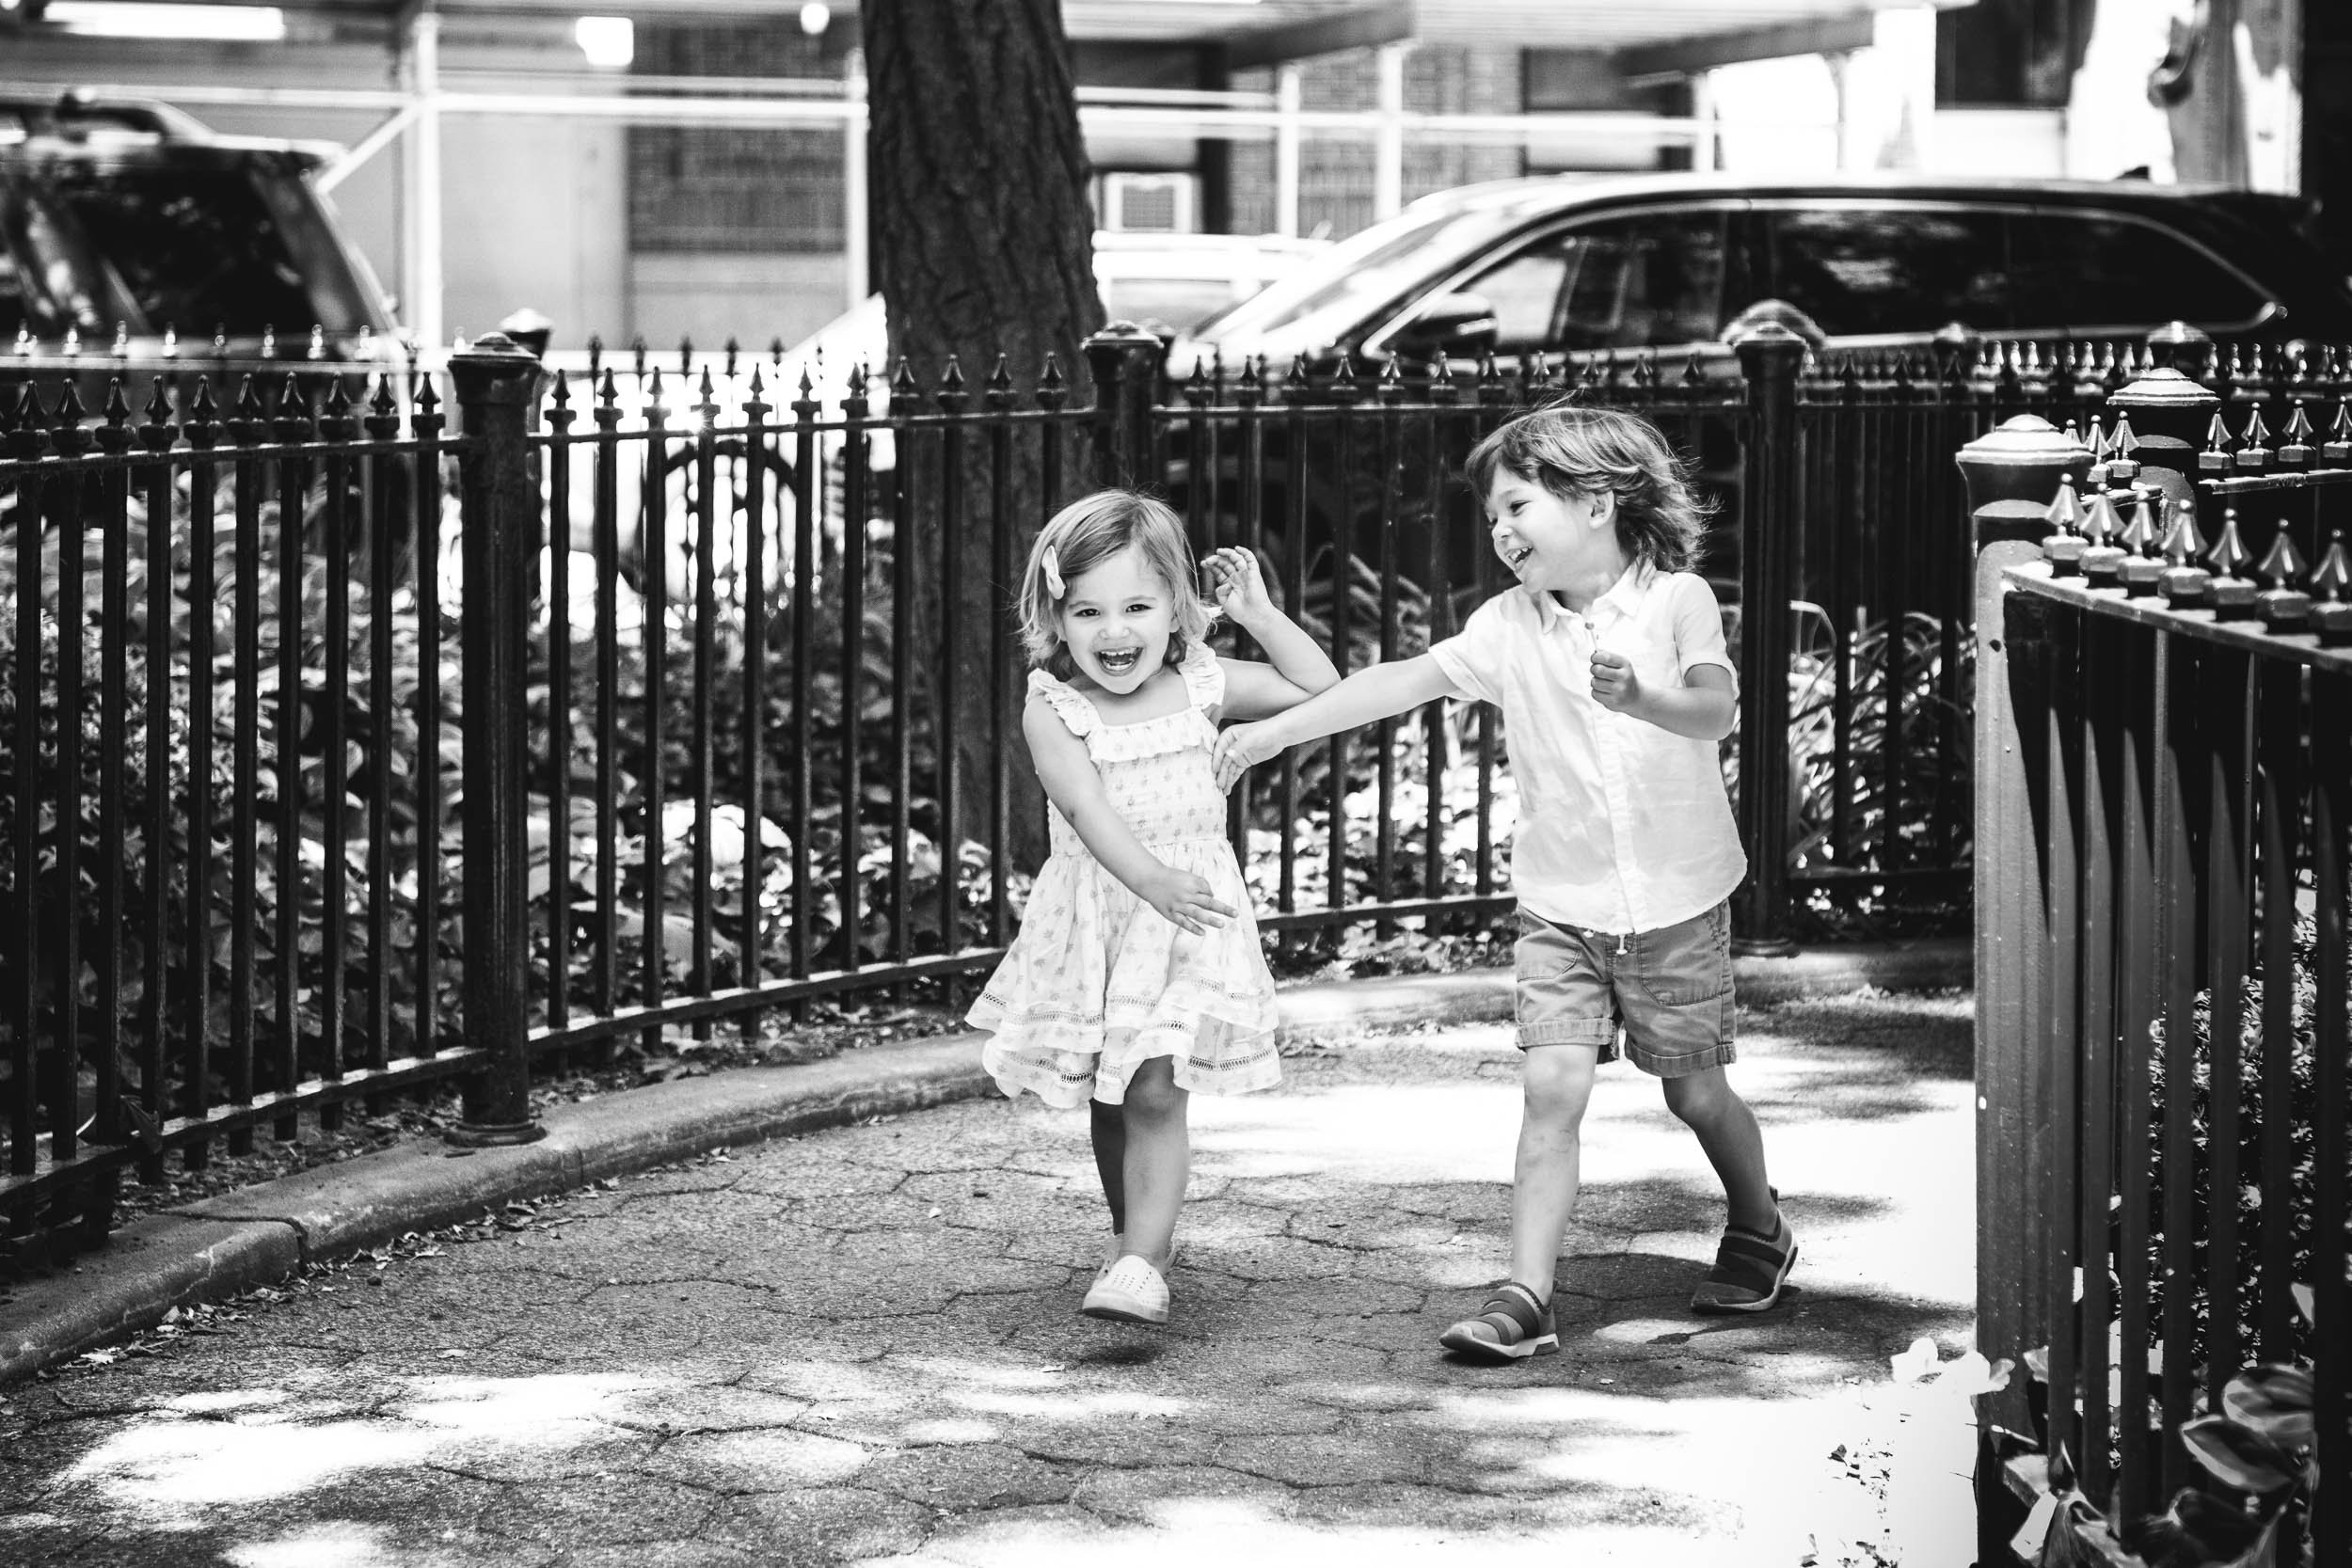  Modern black and white portrait of kids playing at a park in NYC by Nicole Hawkins Photography. NYC photos #NicoleHawkinsPhotograaphy #NicoleHawkinsChildren #NewYorkPortraits #KidsinNewYork #ChildrensPortraits #lifestyleportraits 